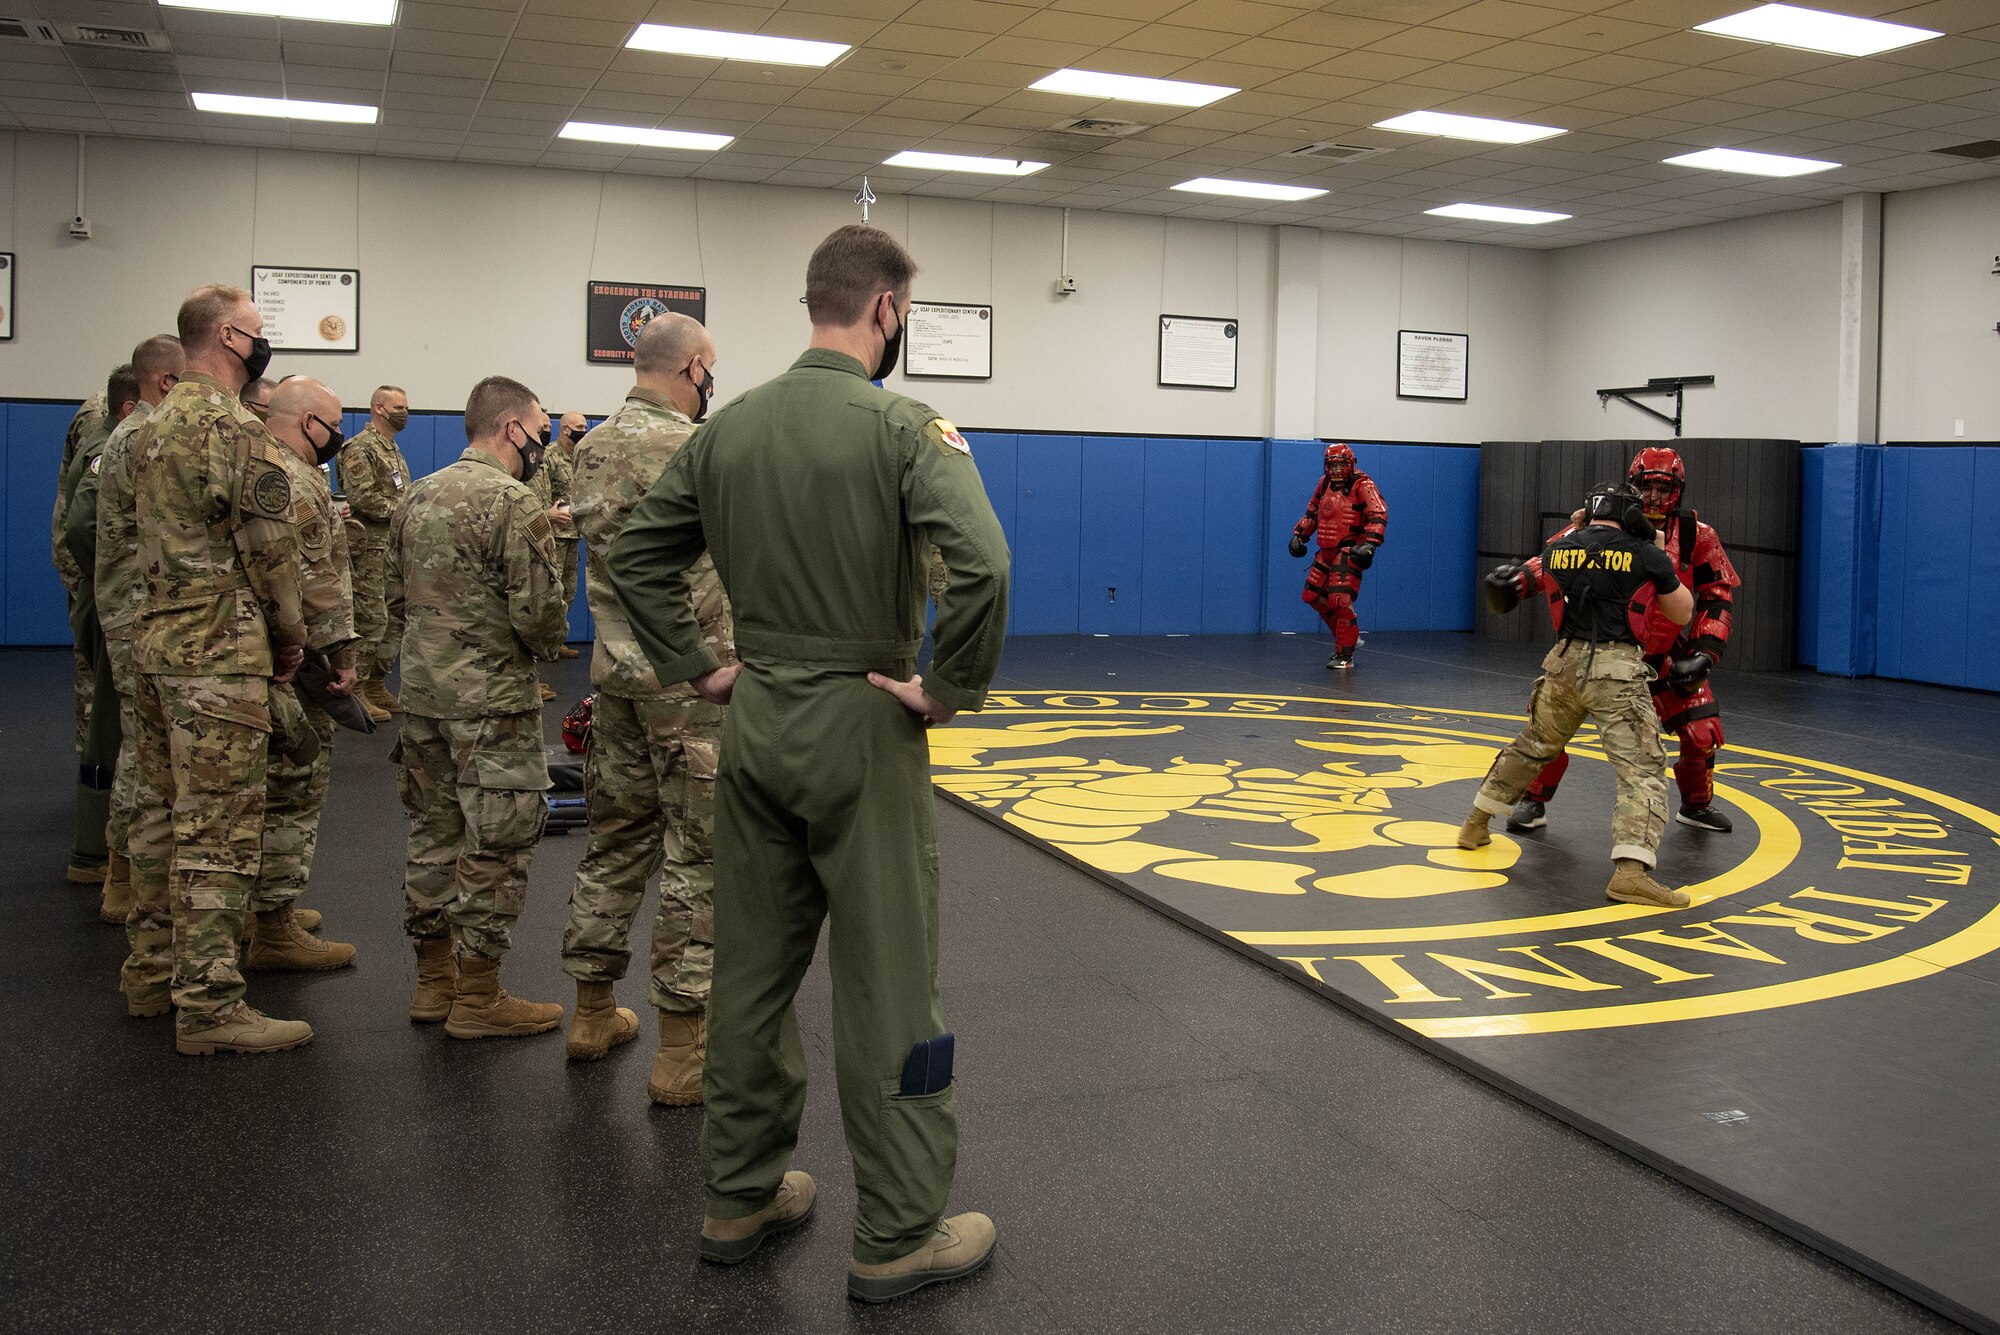 Phoenix Raven Qualification Course instructors assigned to the 421st Combat Training Squadron demonstrate how to neutralize a threat to Total Force Mobility Air Forces leadership during Total Force Phoenix Rally, April 21, 2021, at the U.S. Air Force Expeditionary Center headquarters on Joint Base McGuire-Dix-Lakehurst, New Jersey. U.S. Air Force Expeditionary Operations School instructors were given the opportunity to highlight how they contribute to AMC at its mission. (U.S. Air Force photo by Master Sgt. Ashley Hyatt)